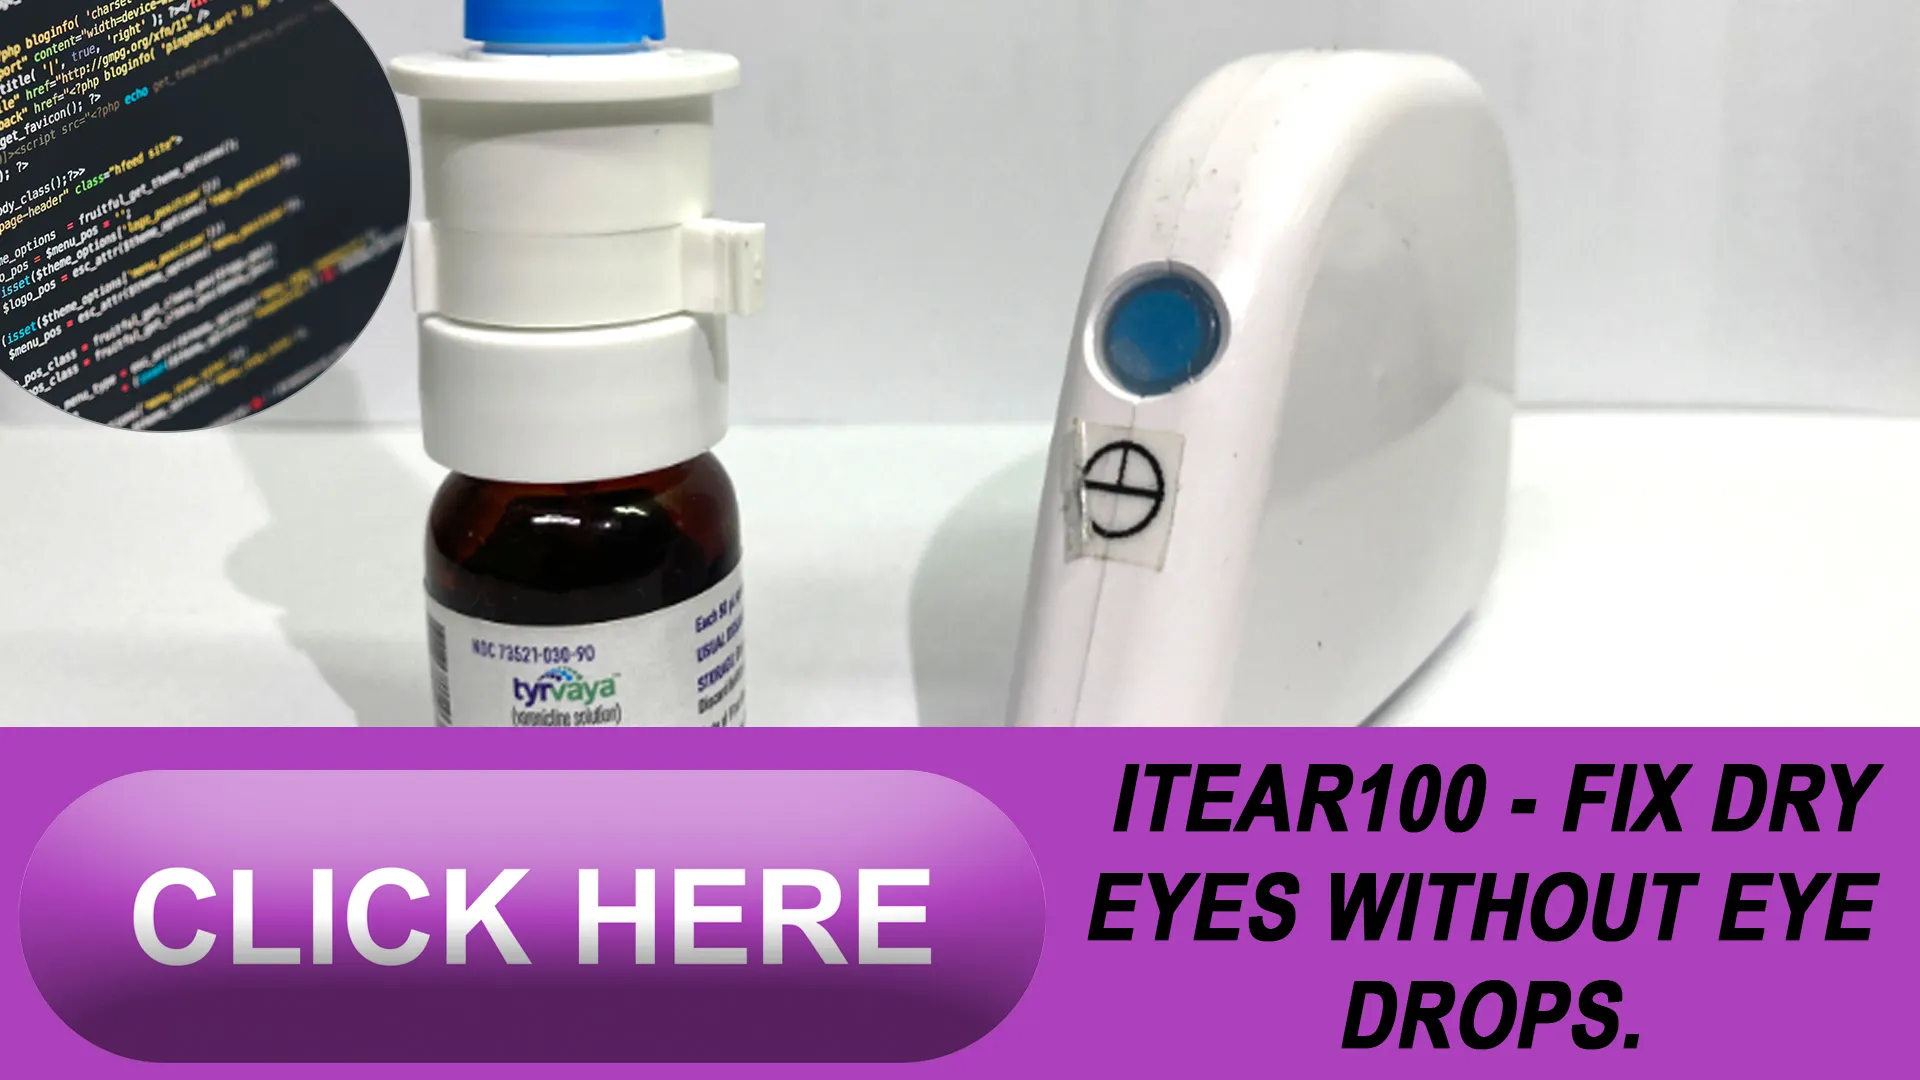  Getting Your Hands on the iTEAR100 